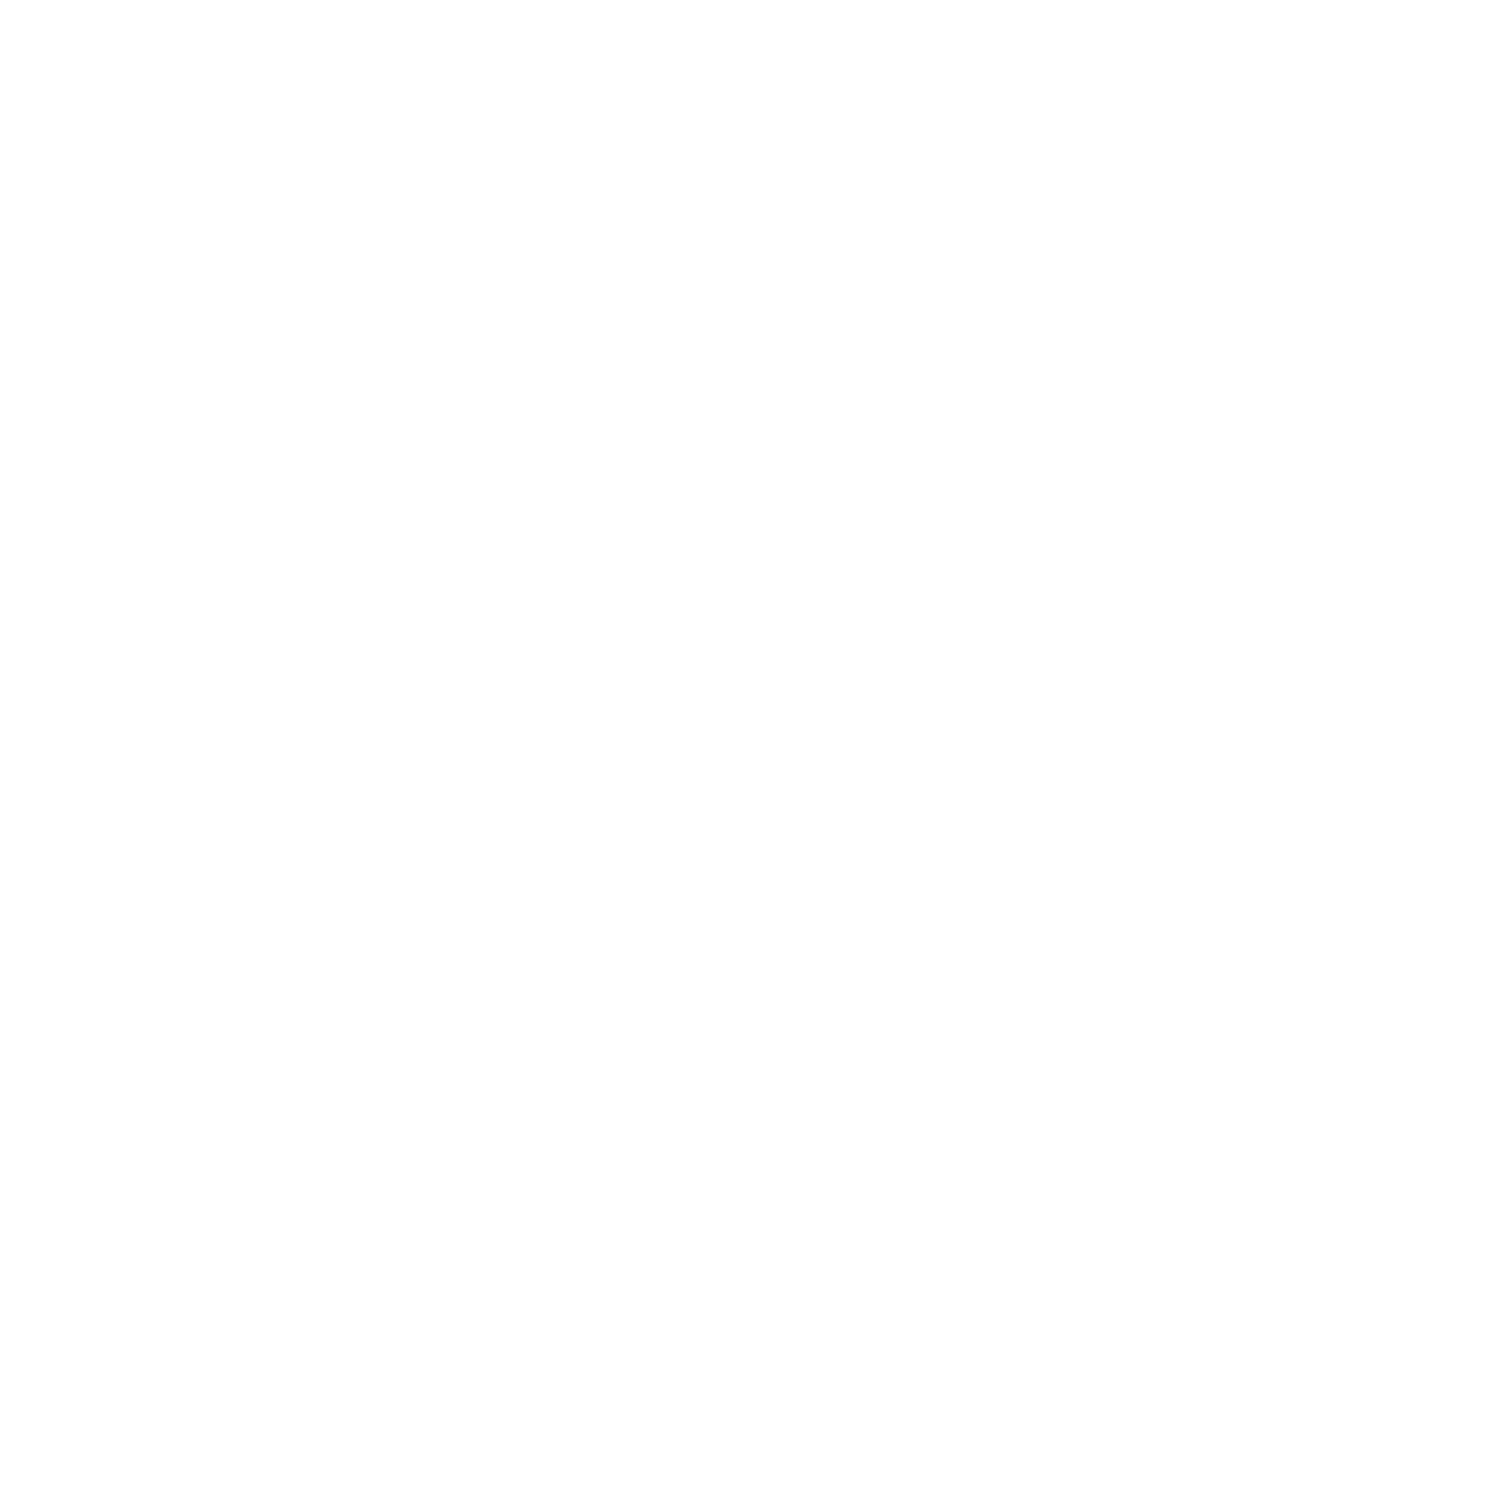 Caan Rose Estates Ltd - Slough : Letting agents in Isleworth Greater London Hounslow